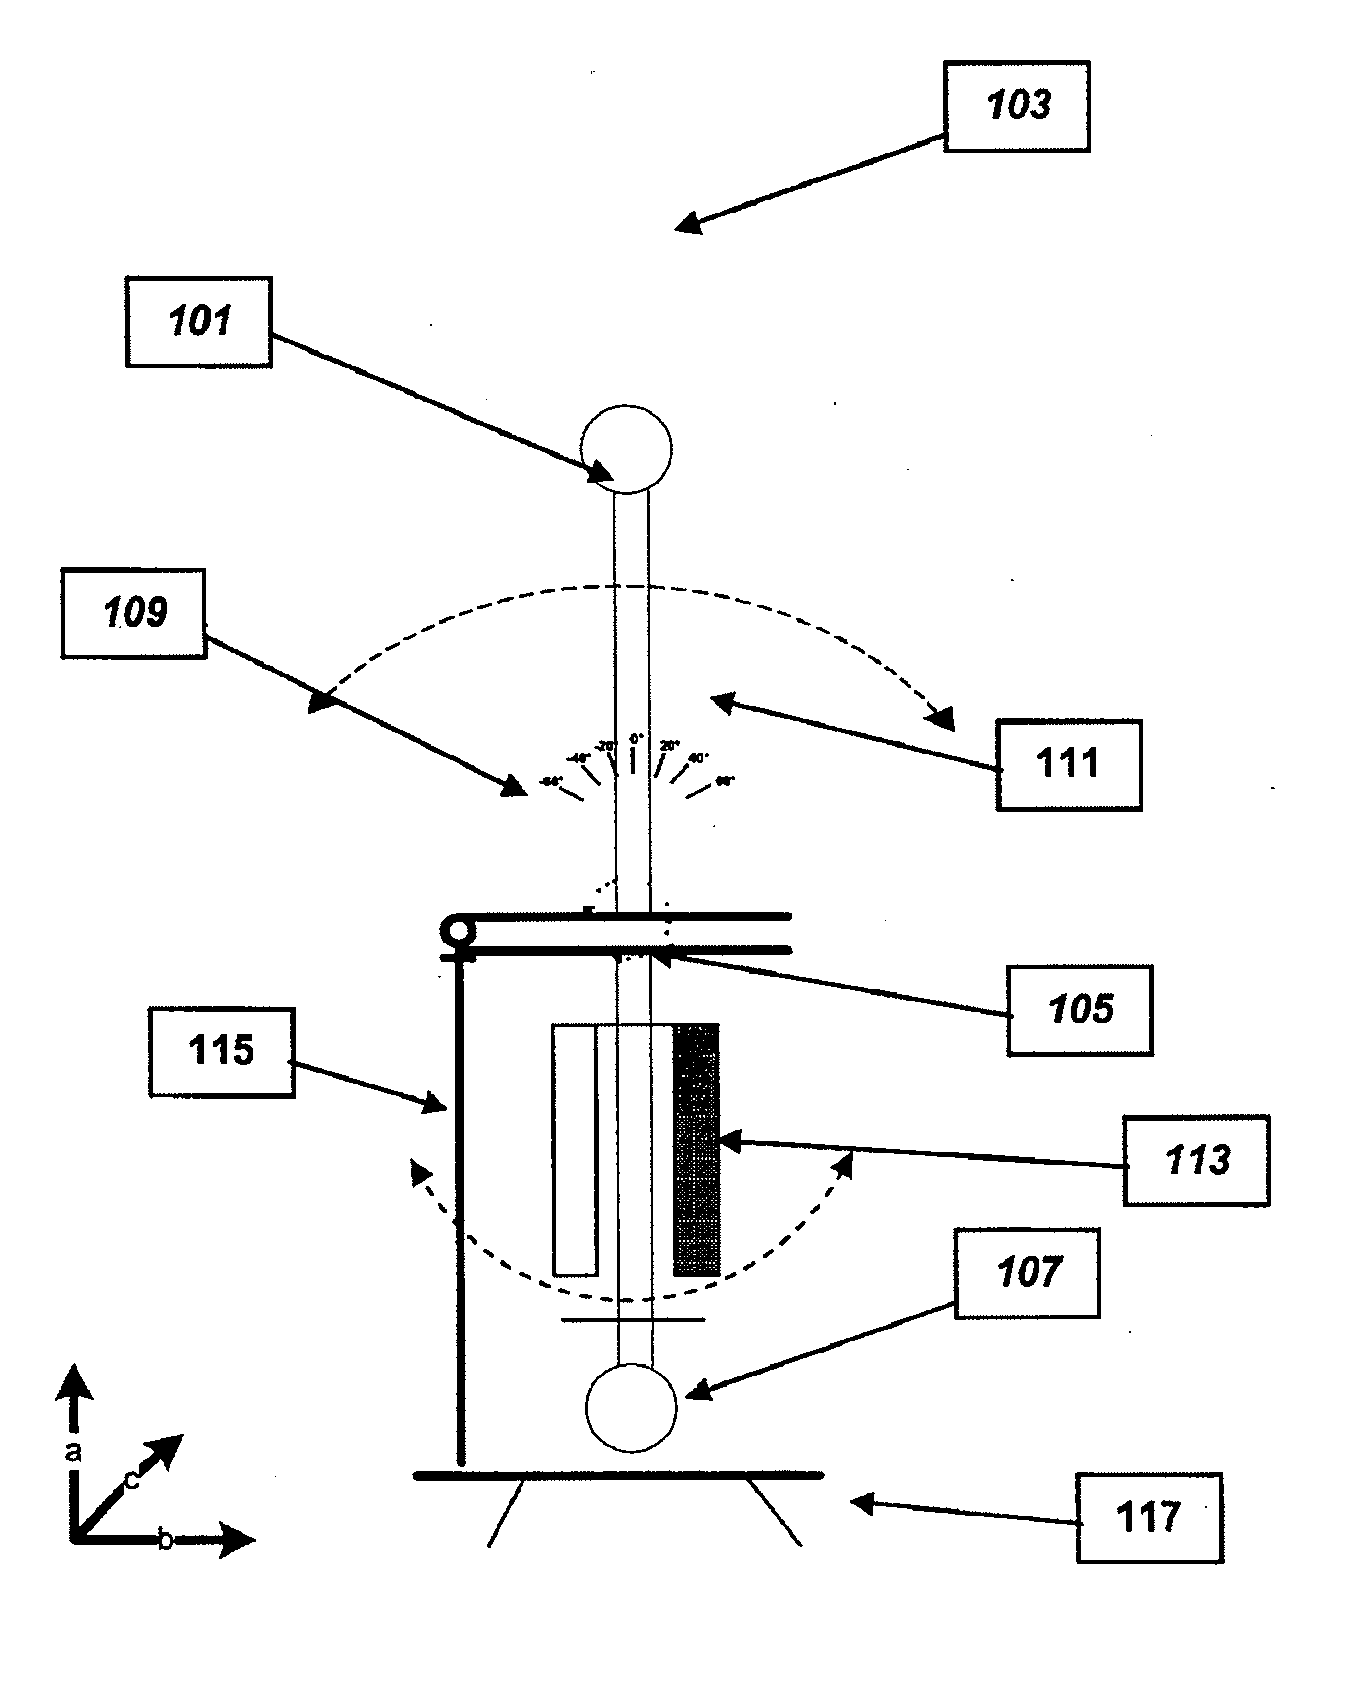 Devices, systems, and methods for measuring and evaluating the motion and function of joints and associated muscles